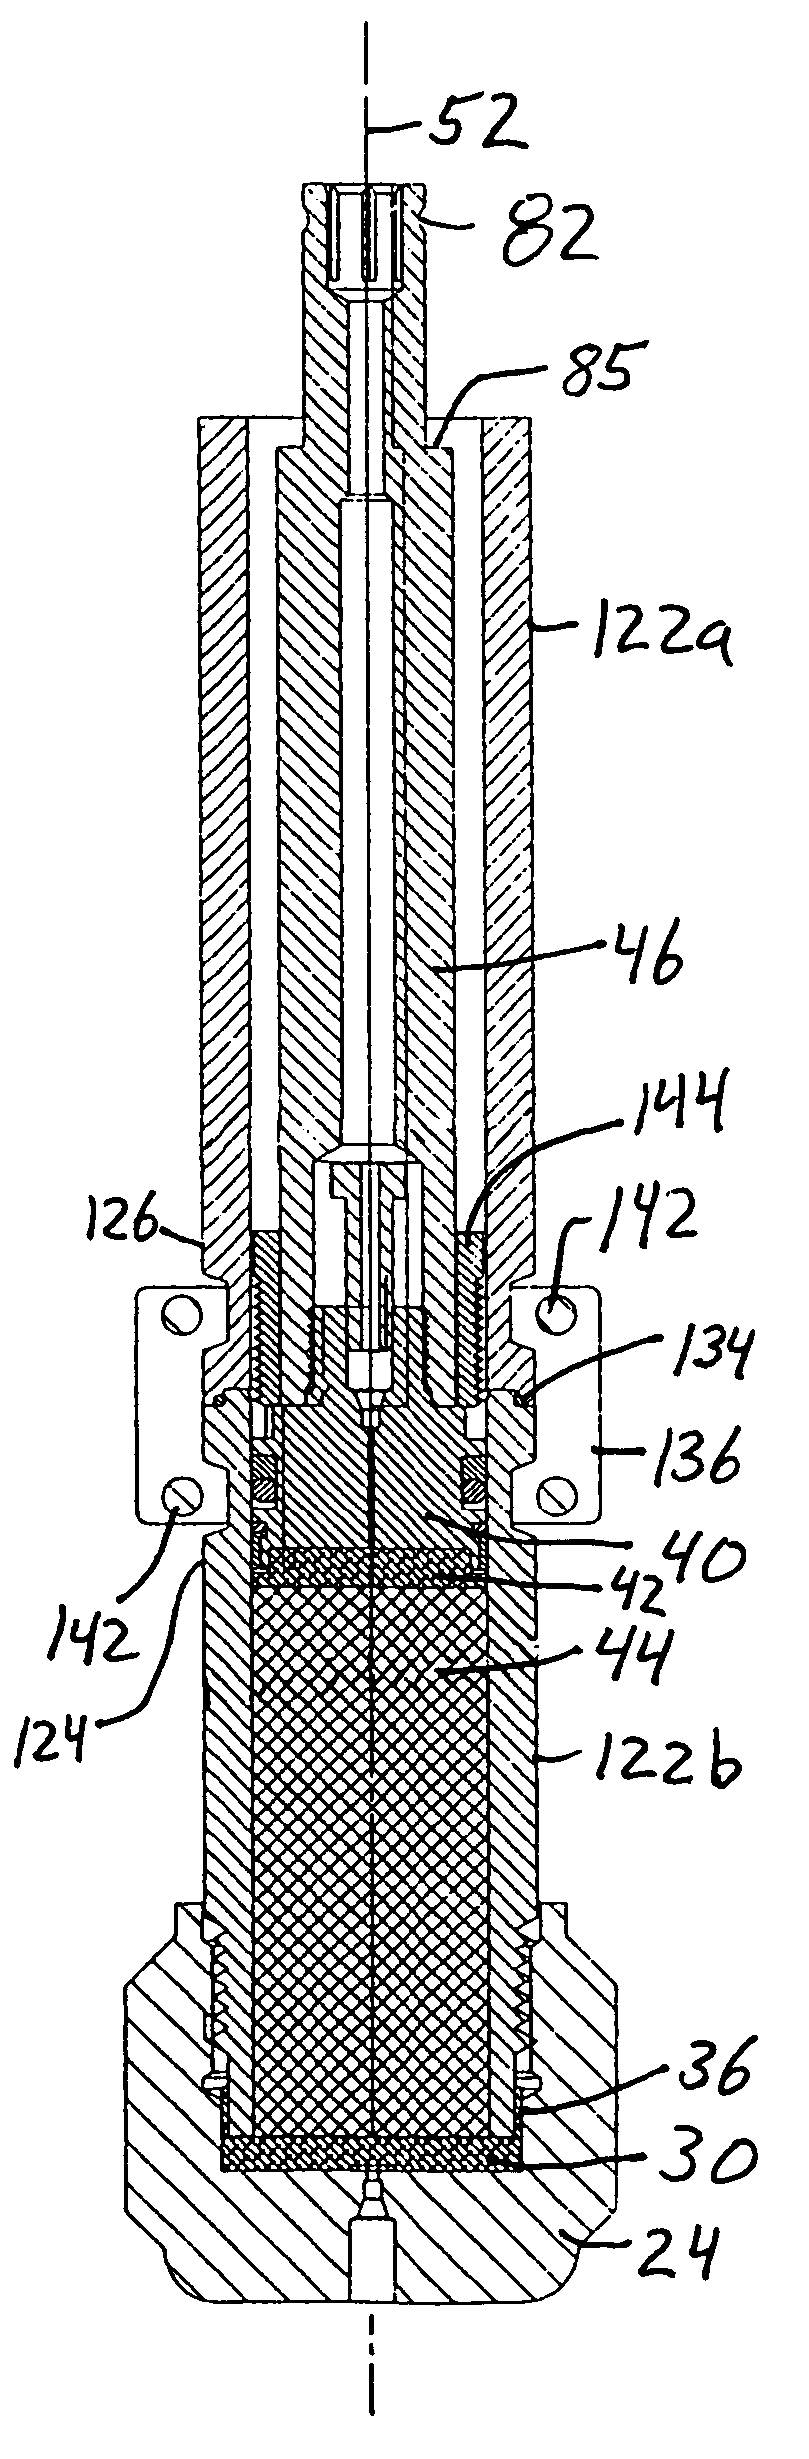 Method and apparatus for packing chromatography columns